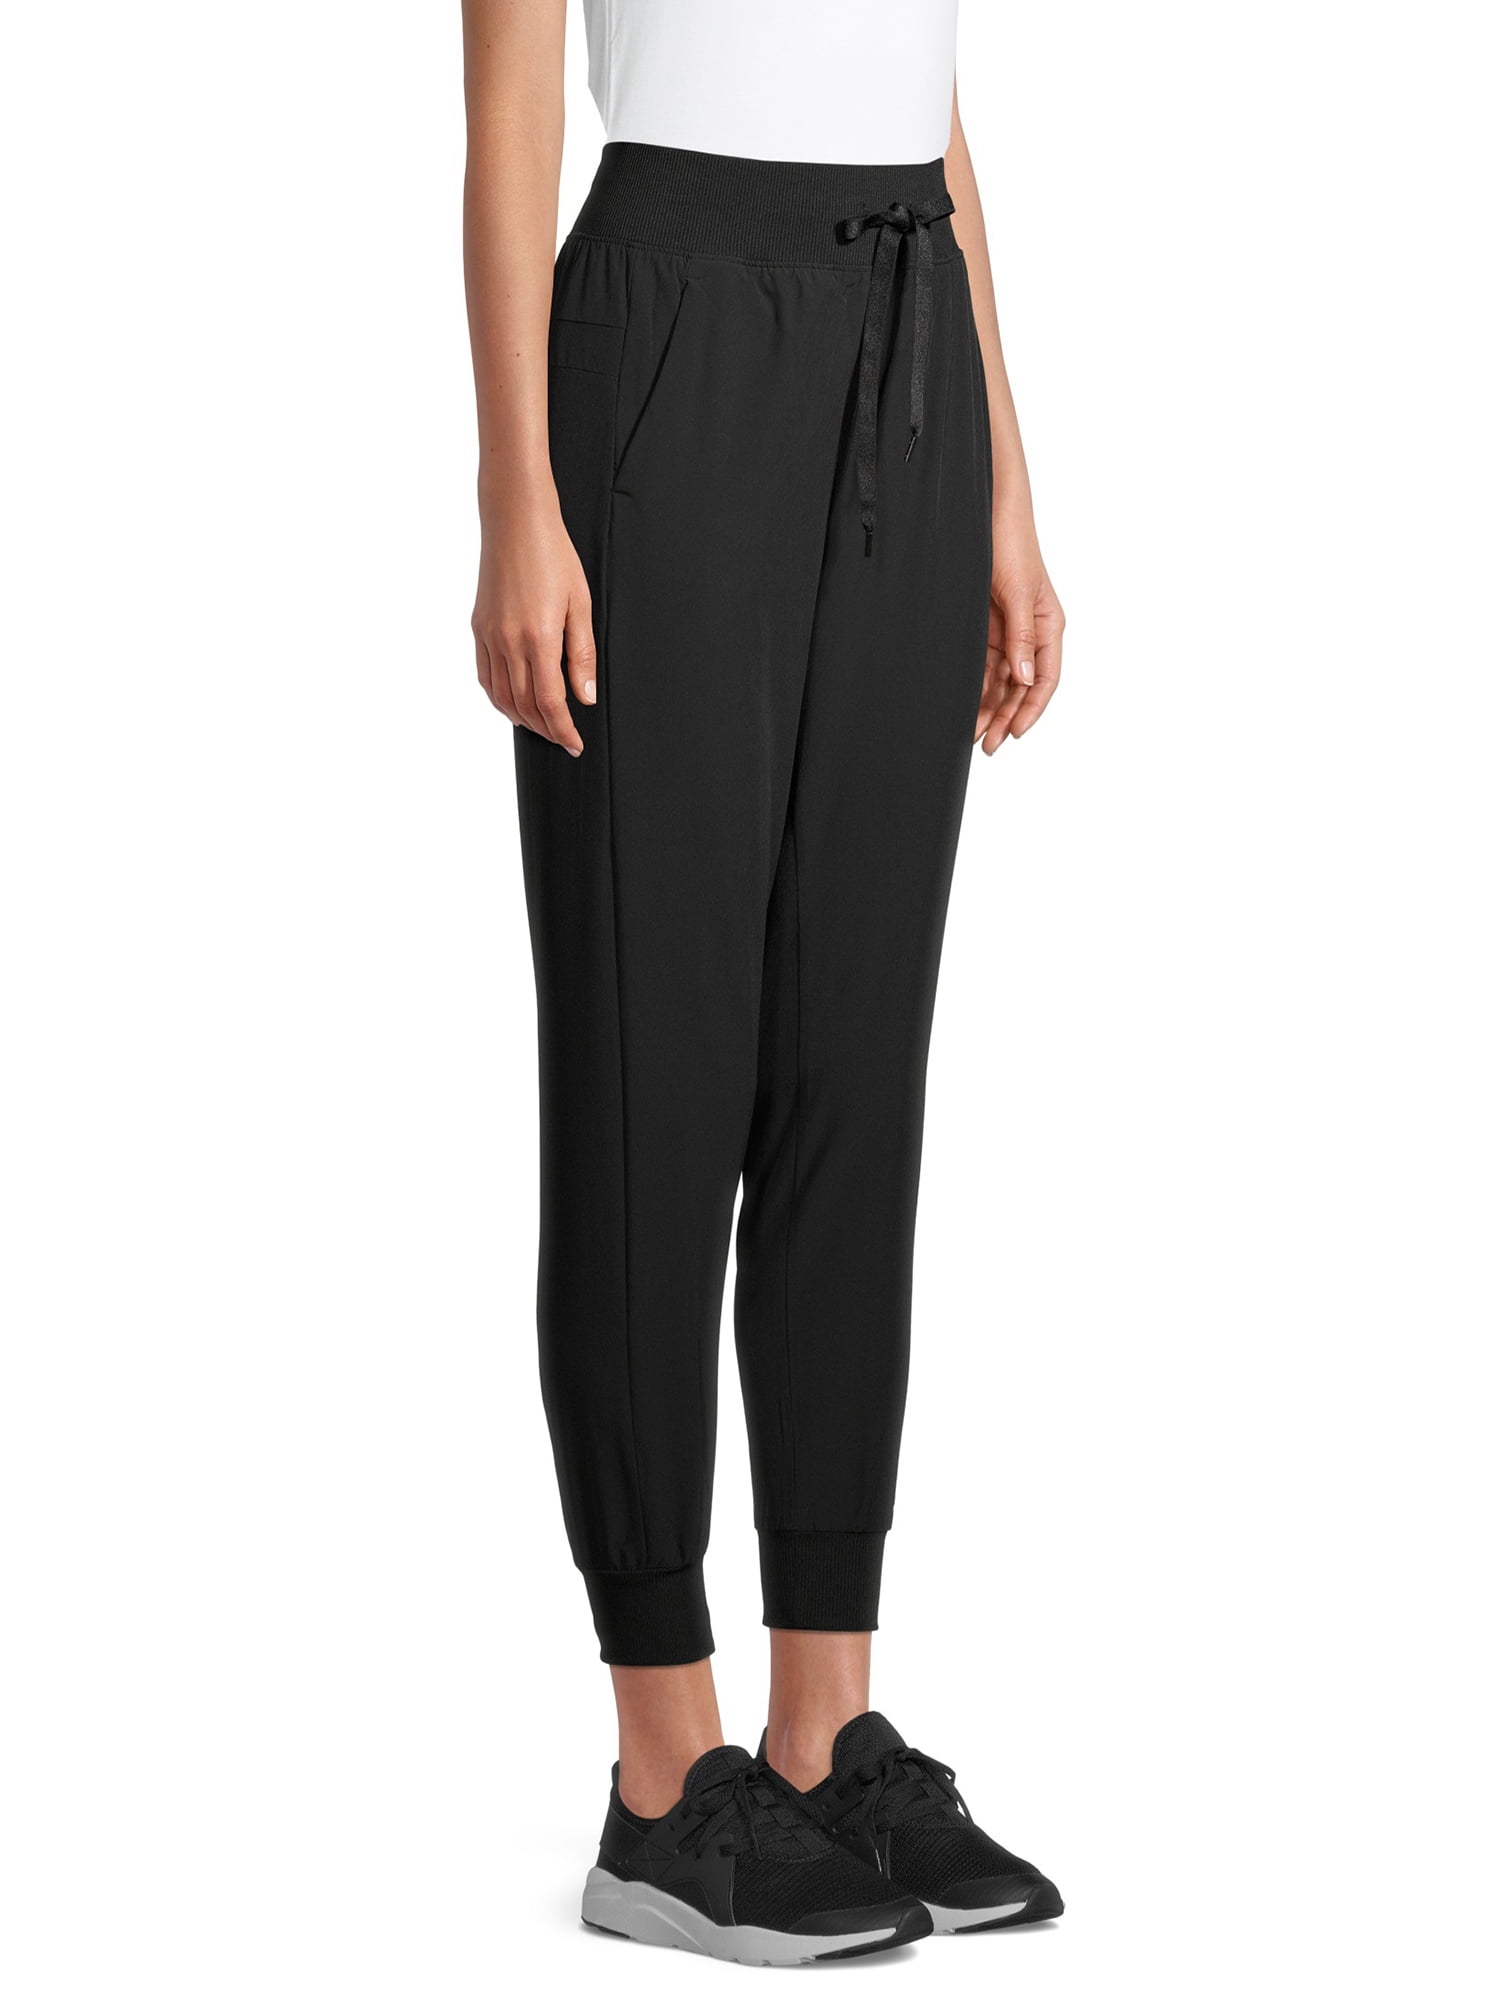 Apana Women's Athleisure Stretch Woven Joggers Pant with Ribbed Cuffs 